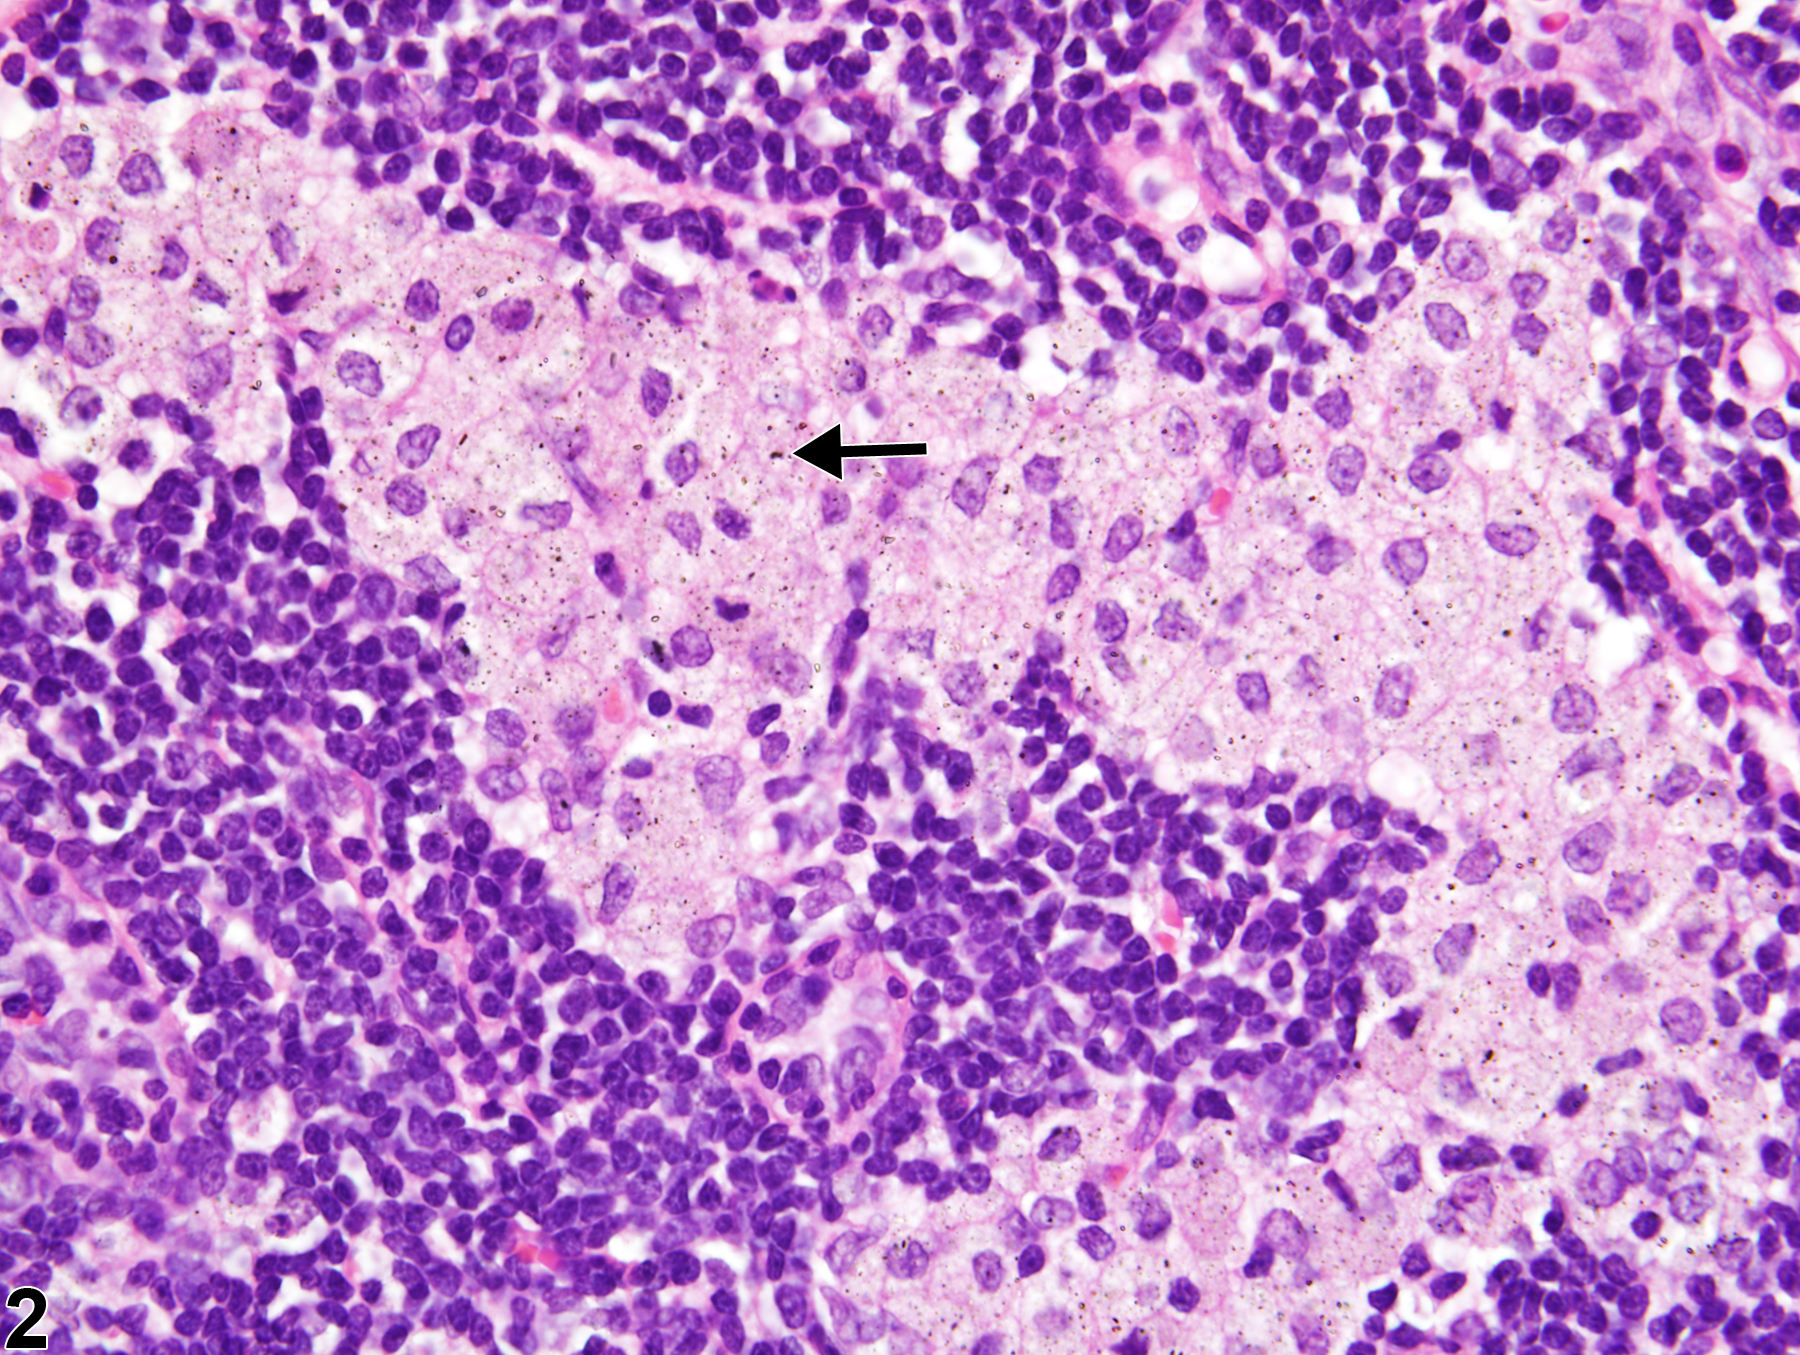 Image of infiltrate, cellular, histiocyte in the lymph node from a male Harlan Sprague-Dawley rat in a subchronic study